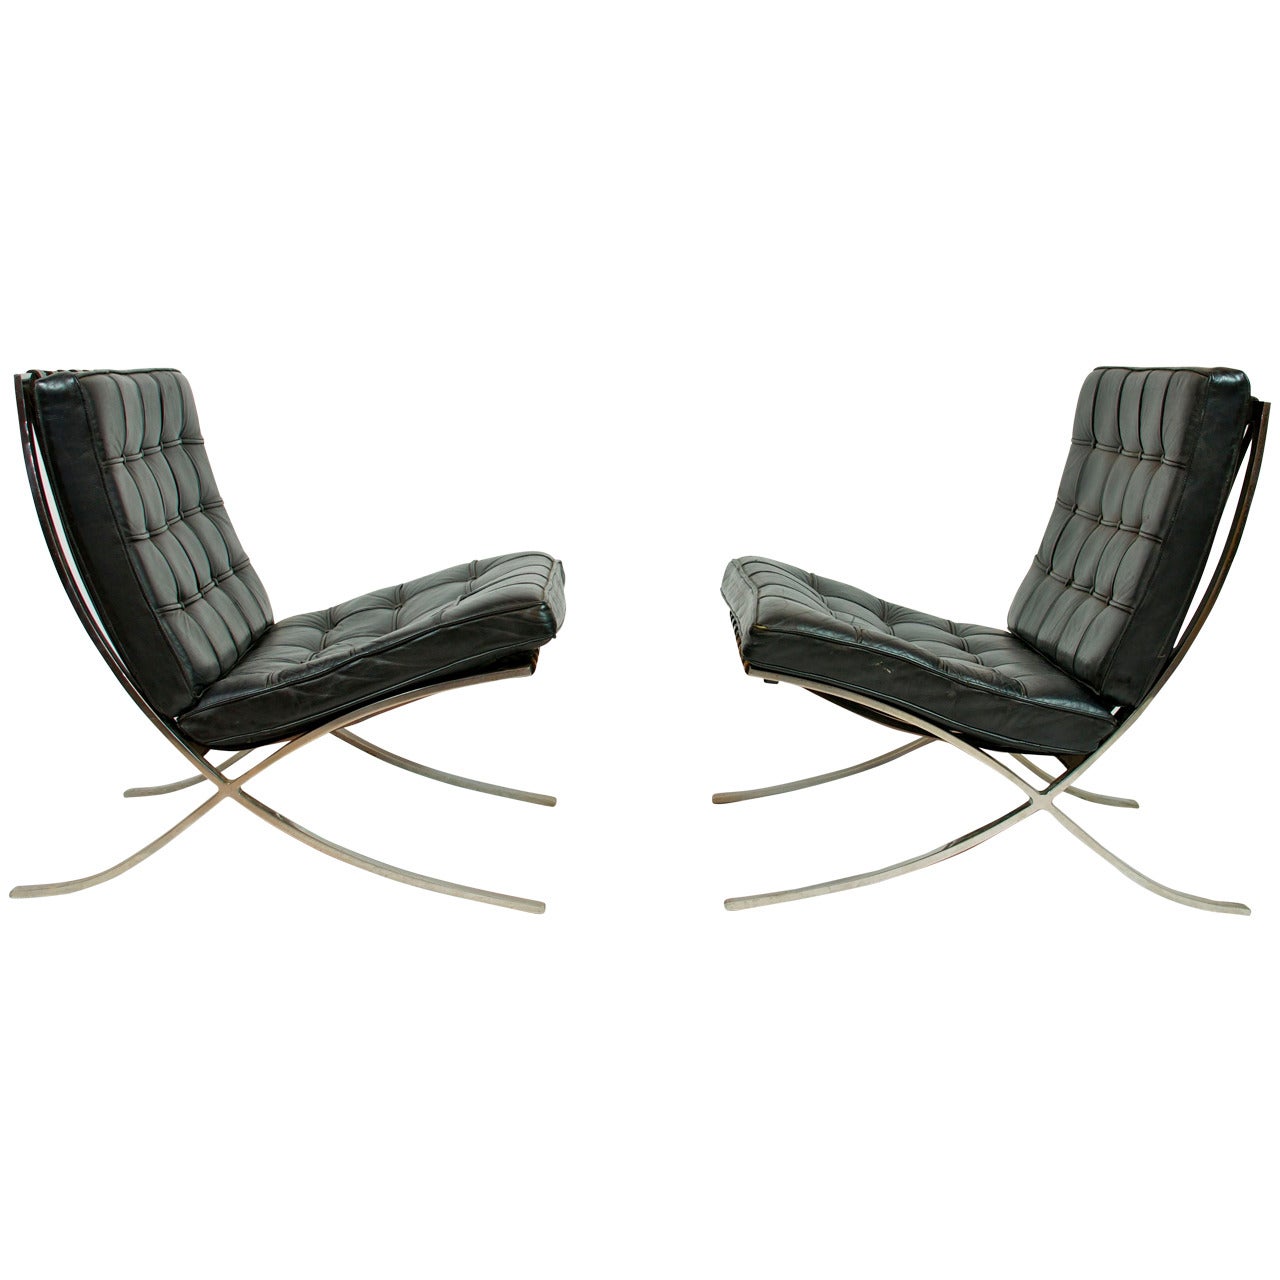 Pair of Early Barcelona Chairs by Mies van der Rohe for Knoll